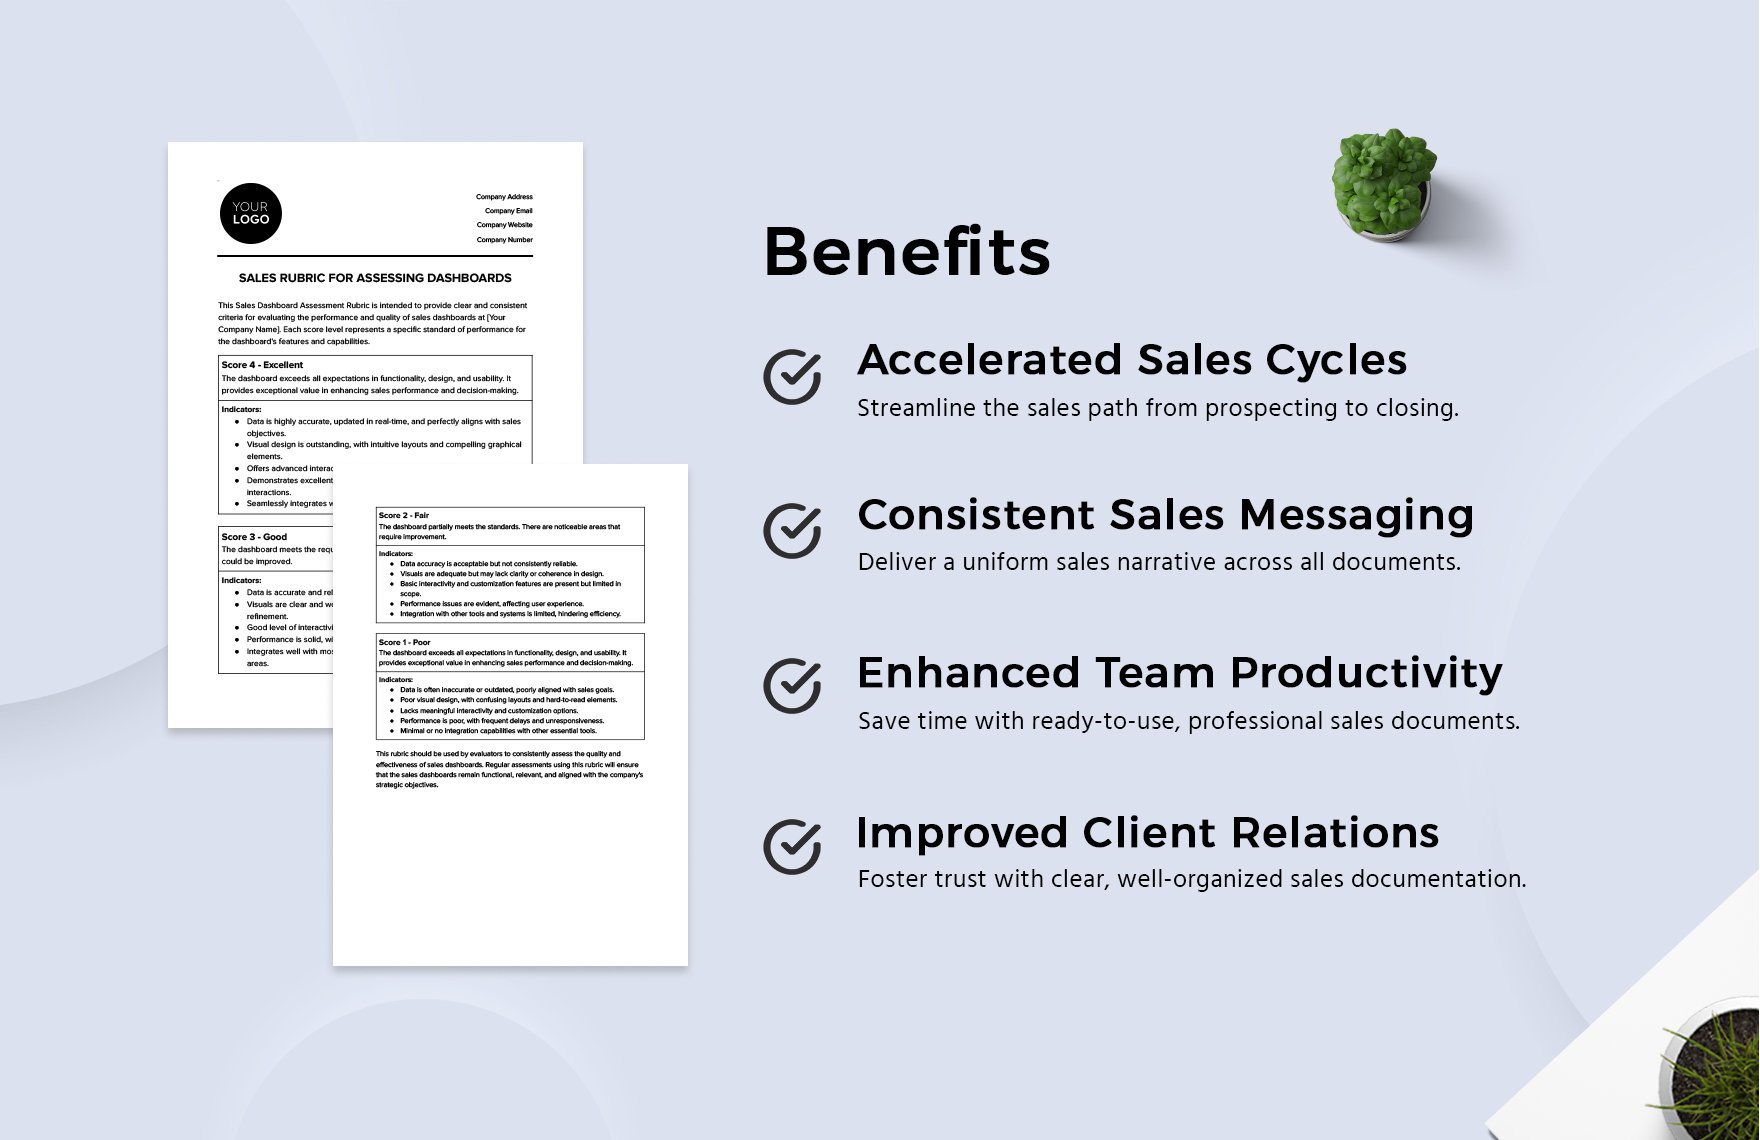 Sales Rubric for Assessing Dashboards Template